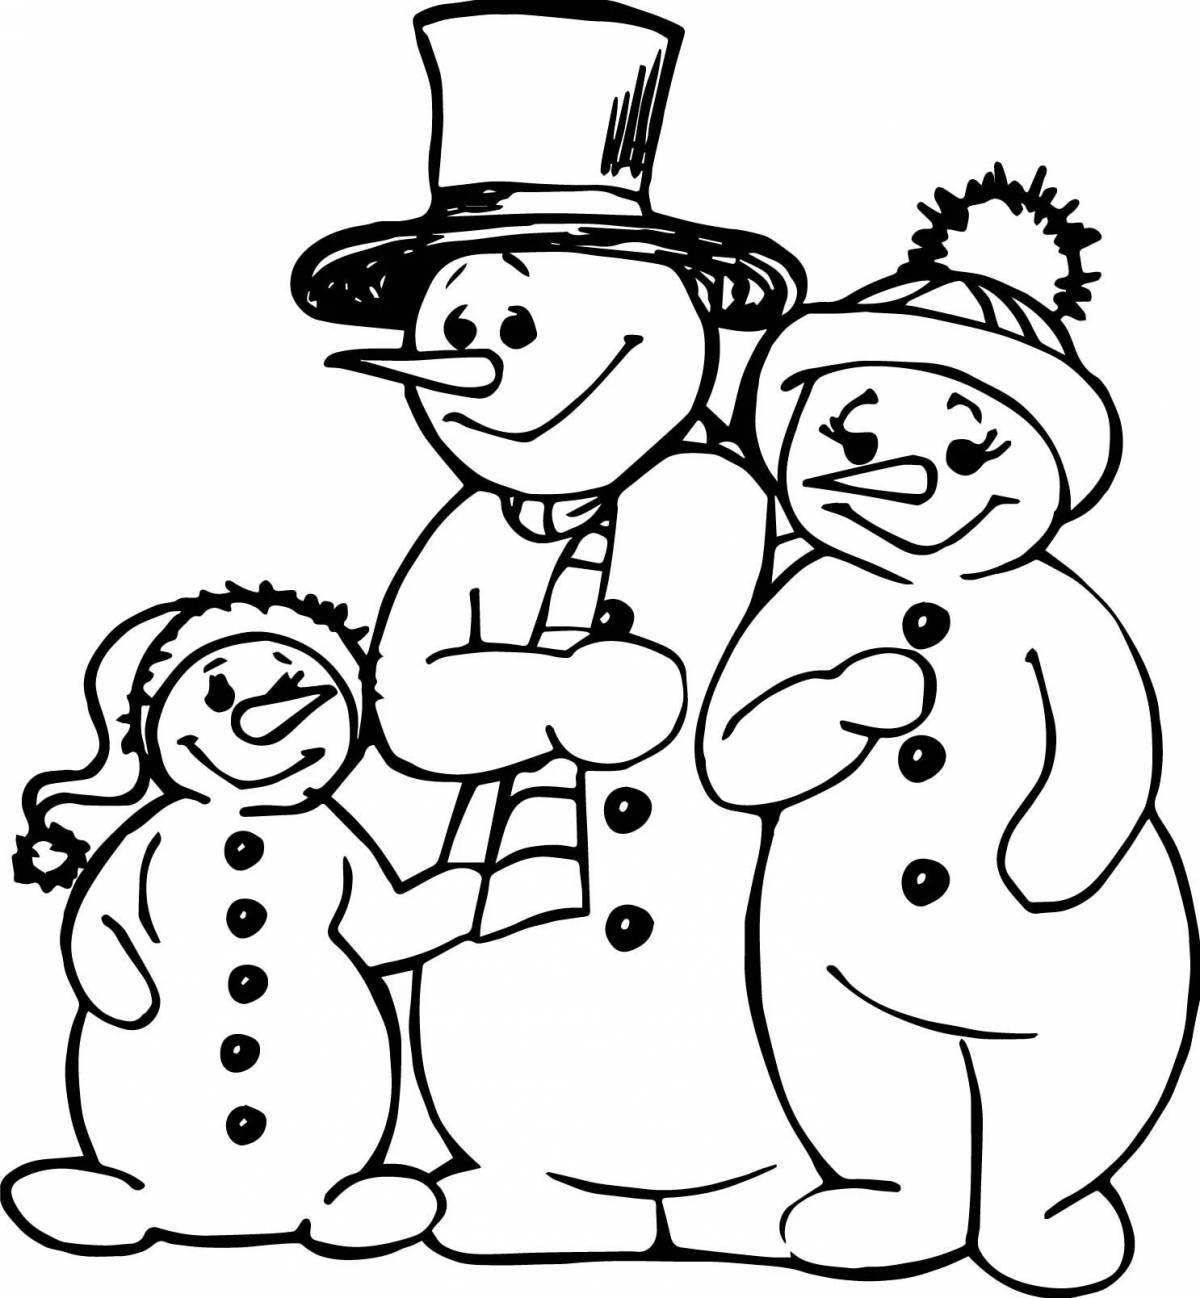 Fancy Christmas family coloring book